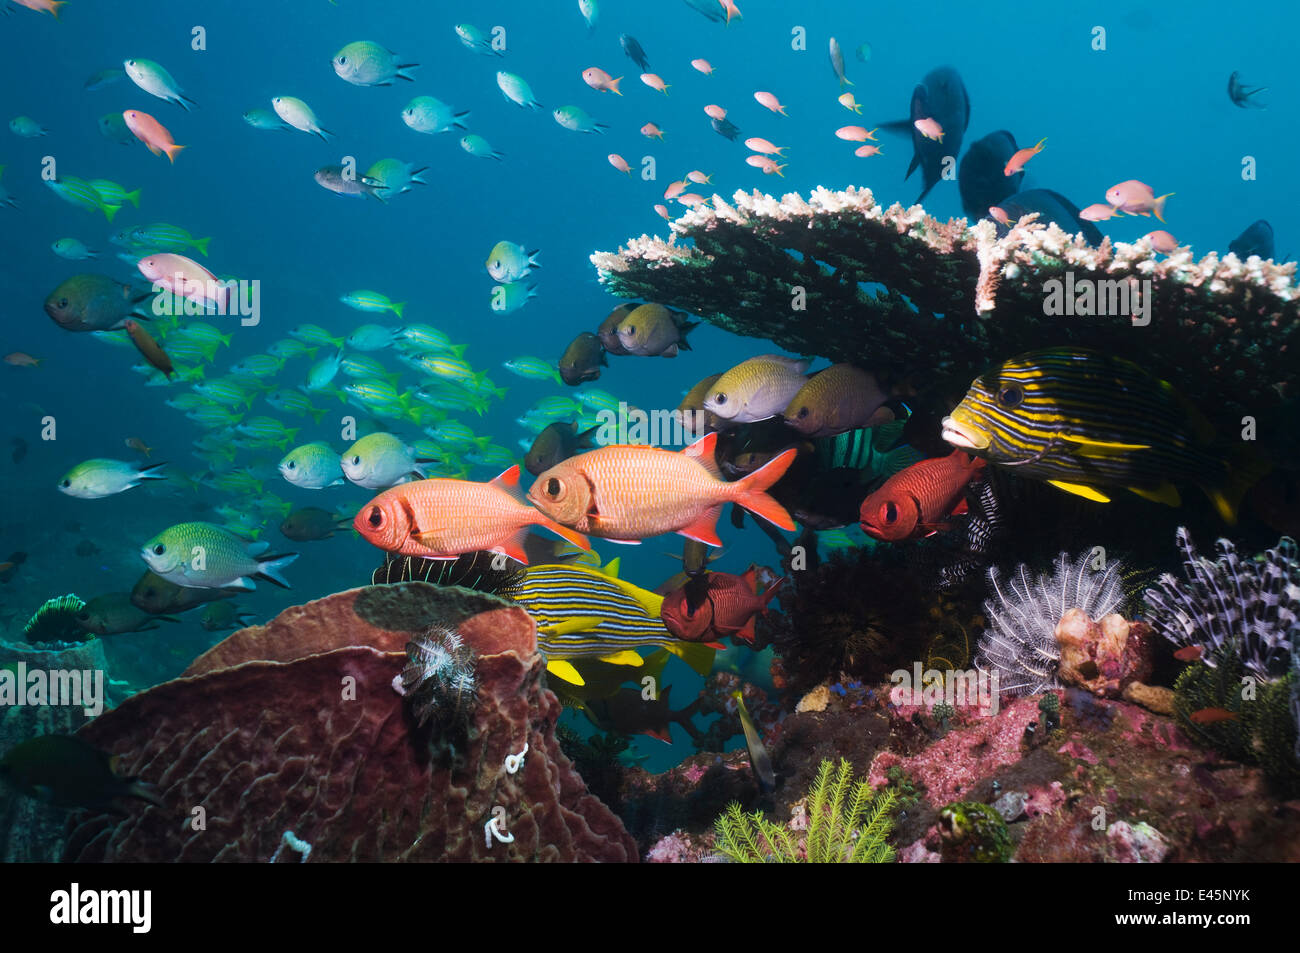 Bigscale soldierfish (Myripristis berndti), Sweetlips, Philippine chromis with Blueline snappers in background. Komodo National Park, Indonesia Stock Photo